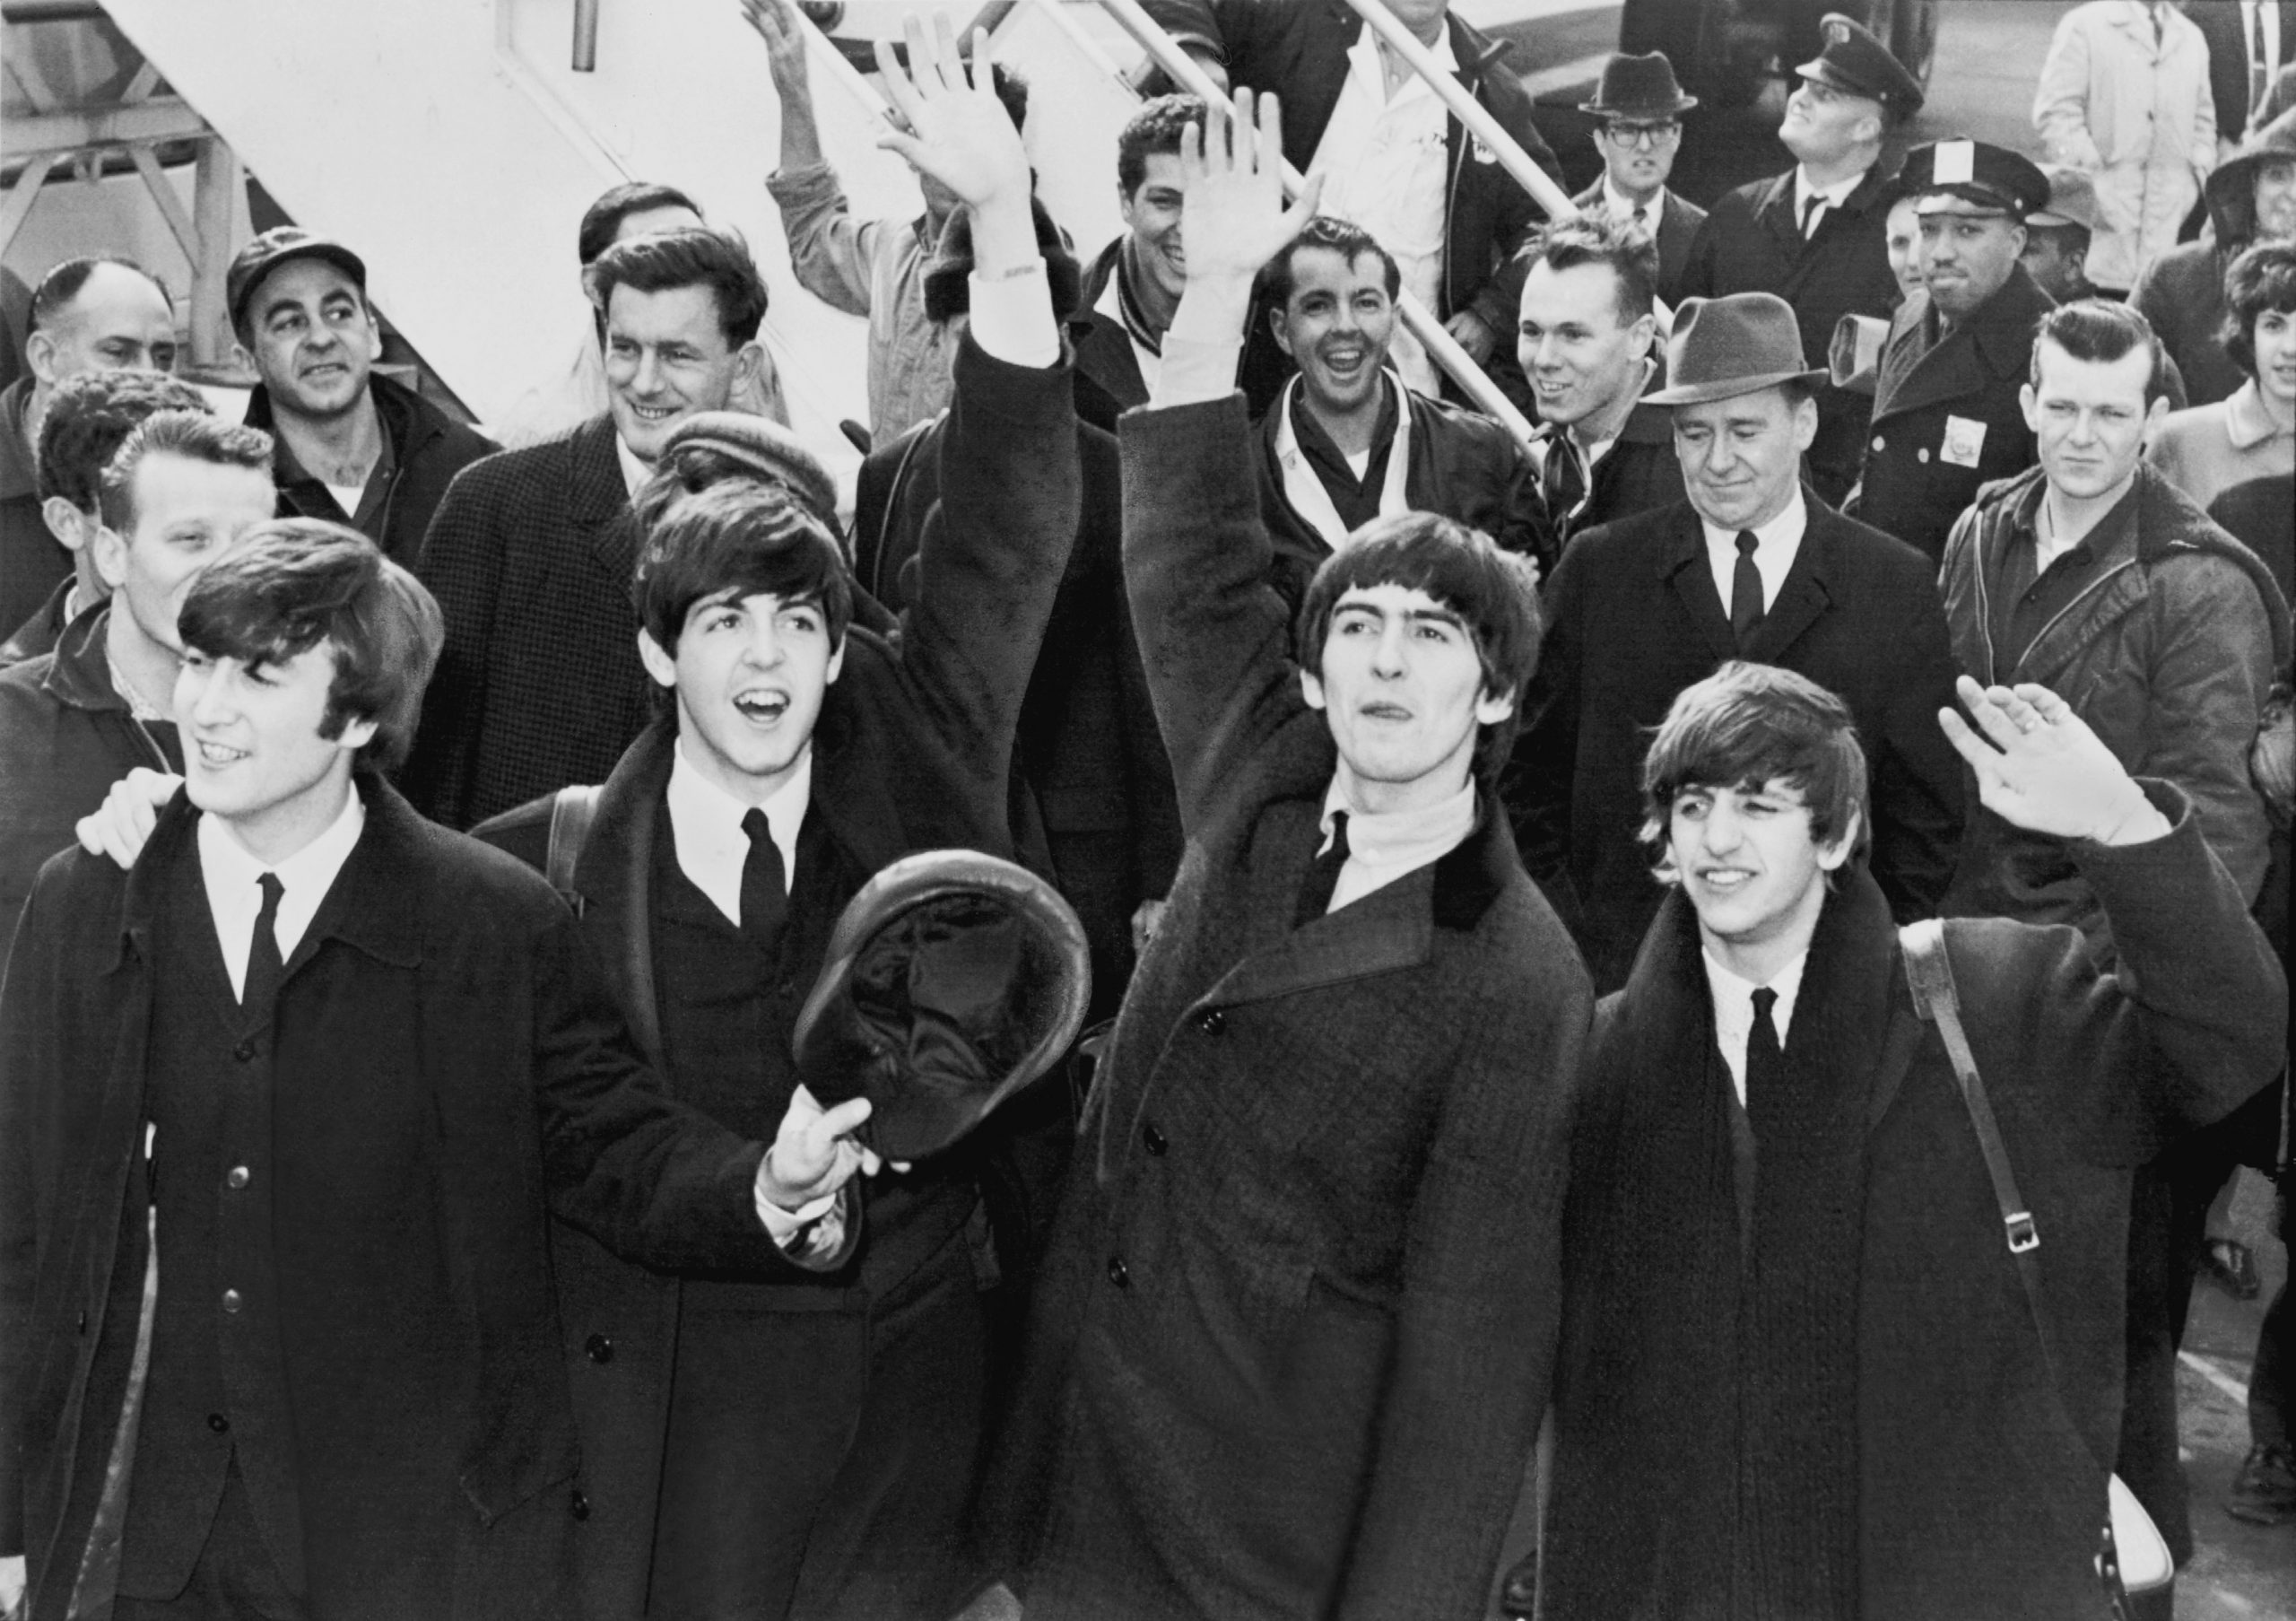 The Beatles arriving at John F. Kennedy International Airport in 1964